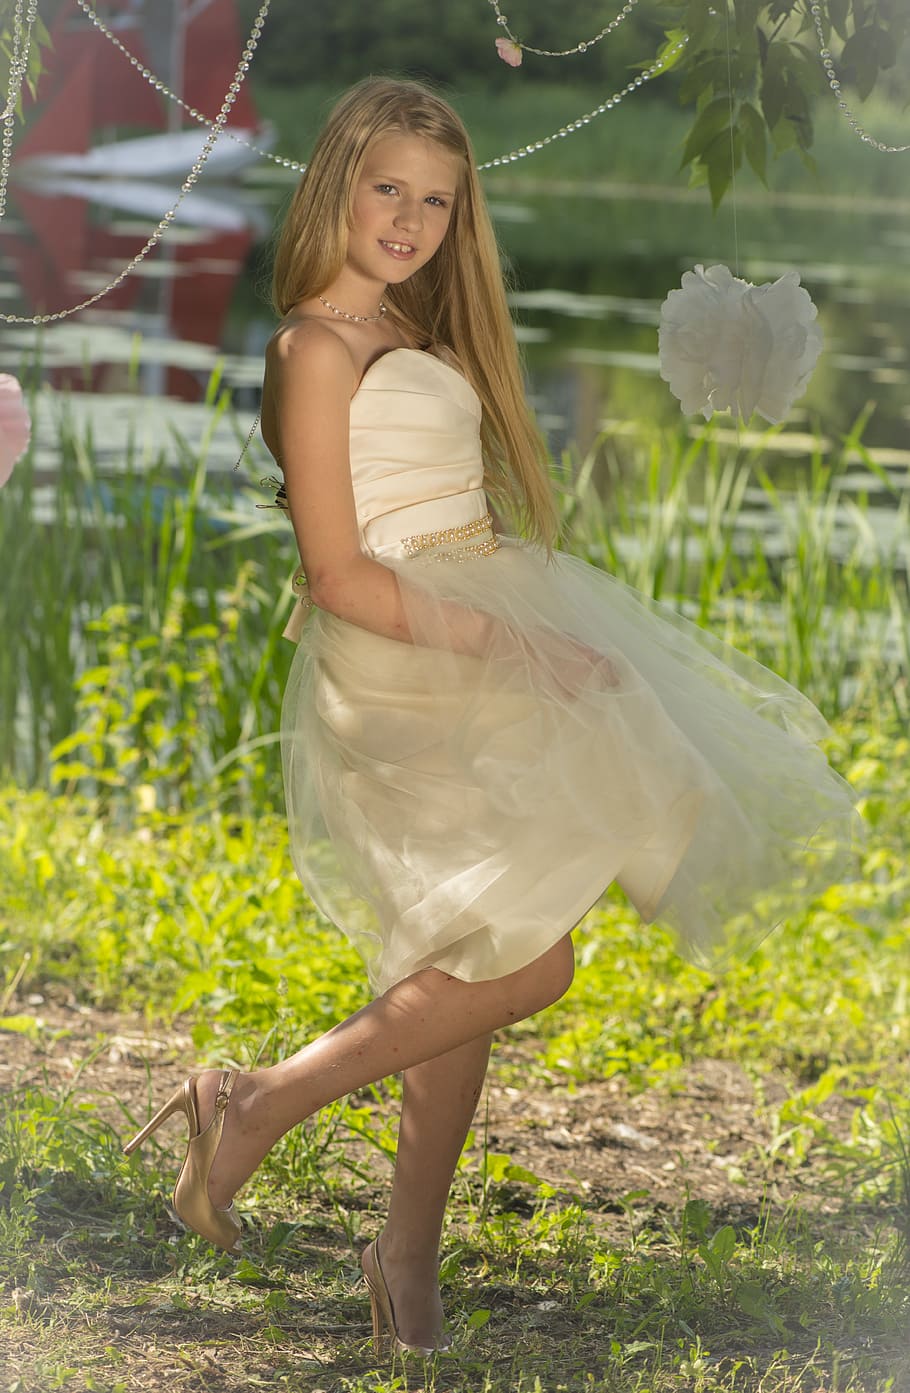 girl, white, sweetheart neckline strapless dress, green, grass field, nature, fun, happiness, colorful, life